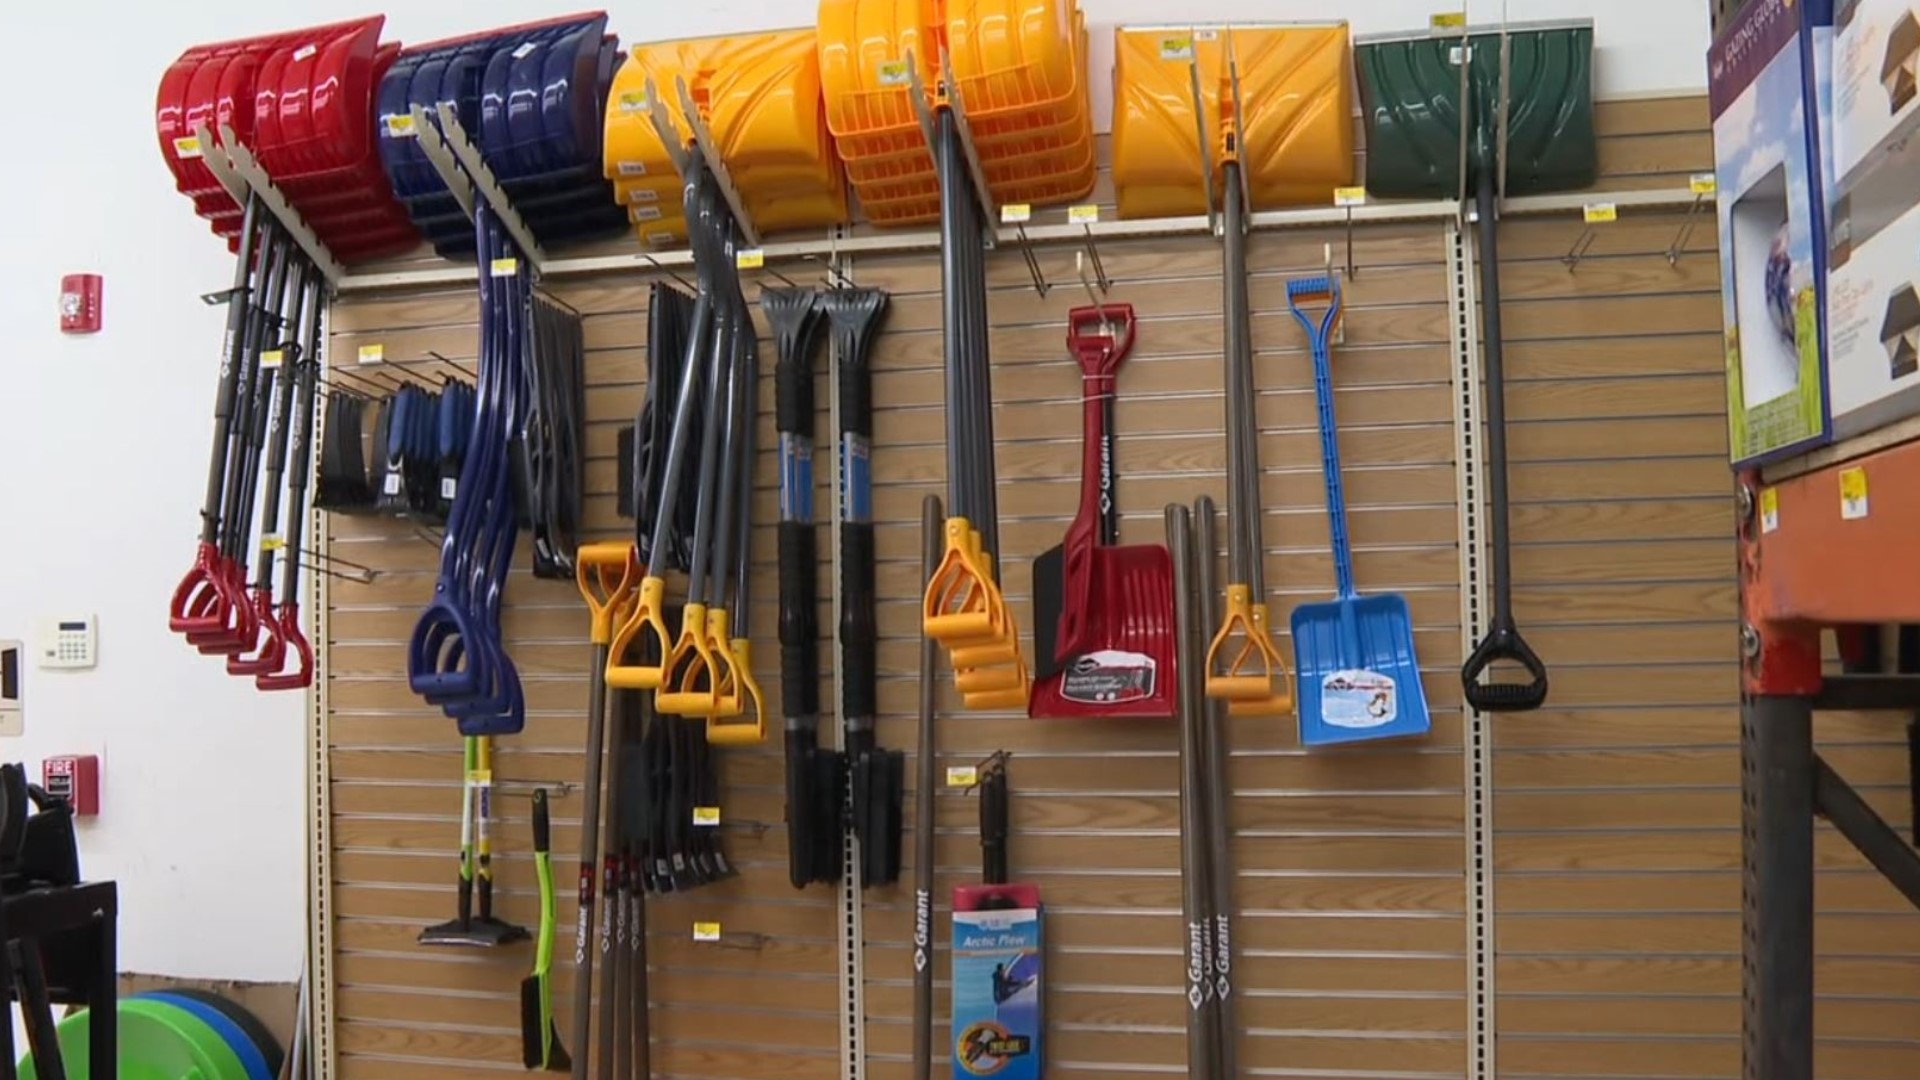 Local hardware stores are trying to keep up with demand for snow removal equipment before supply chain issues catch up with them.